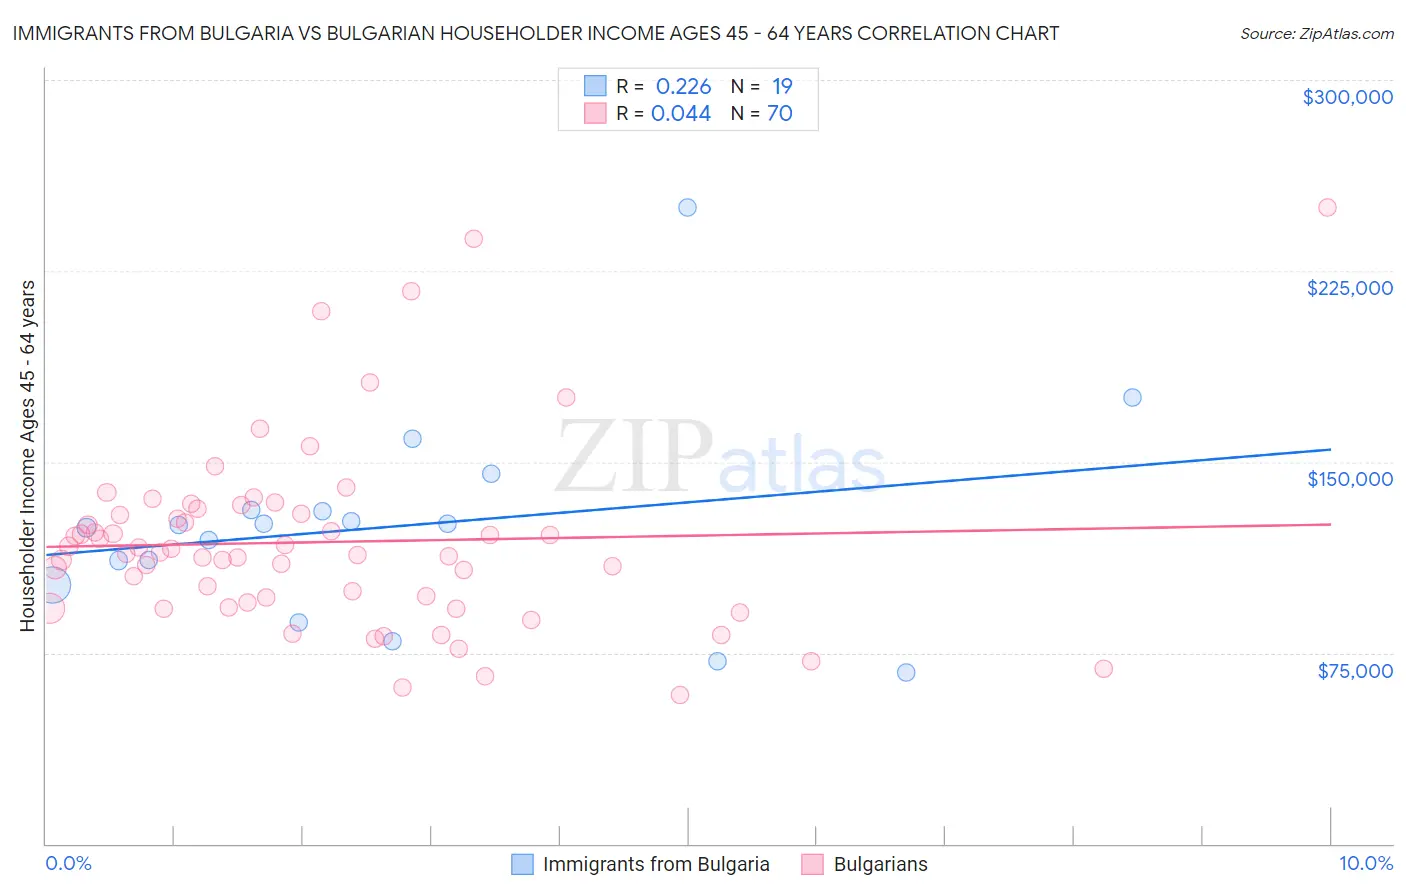 Immigrants from Bulgaria vs Bulgarian Householder Income Ages 45 - 64 years